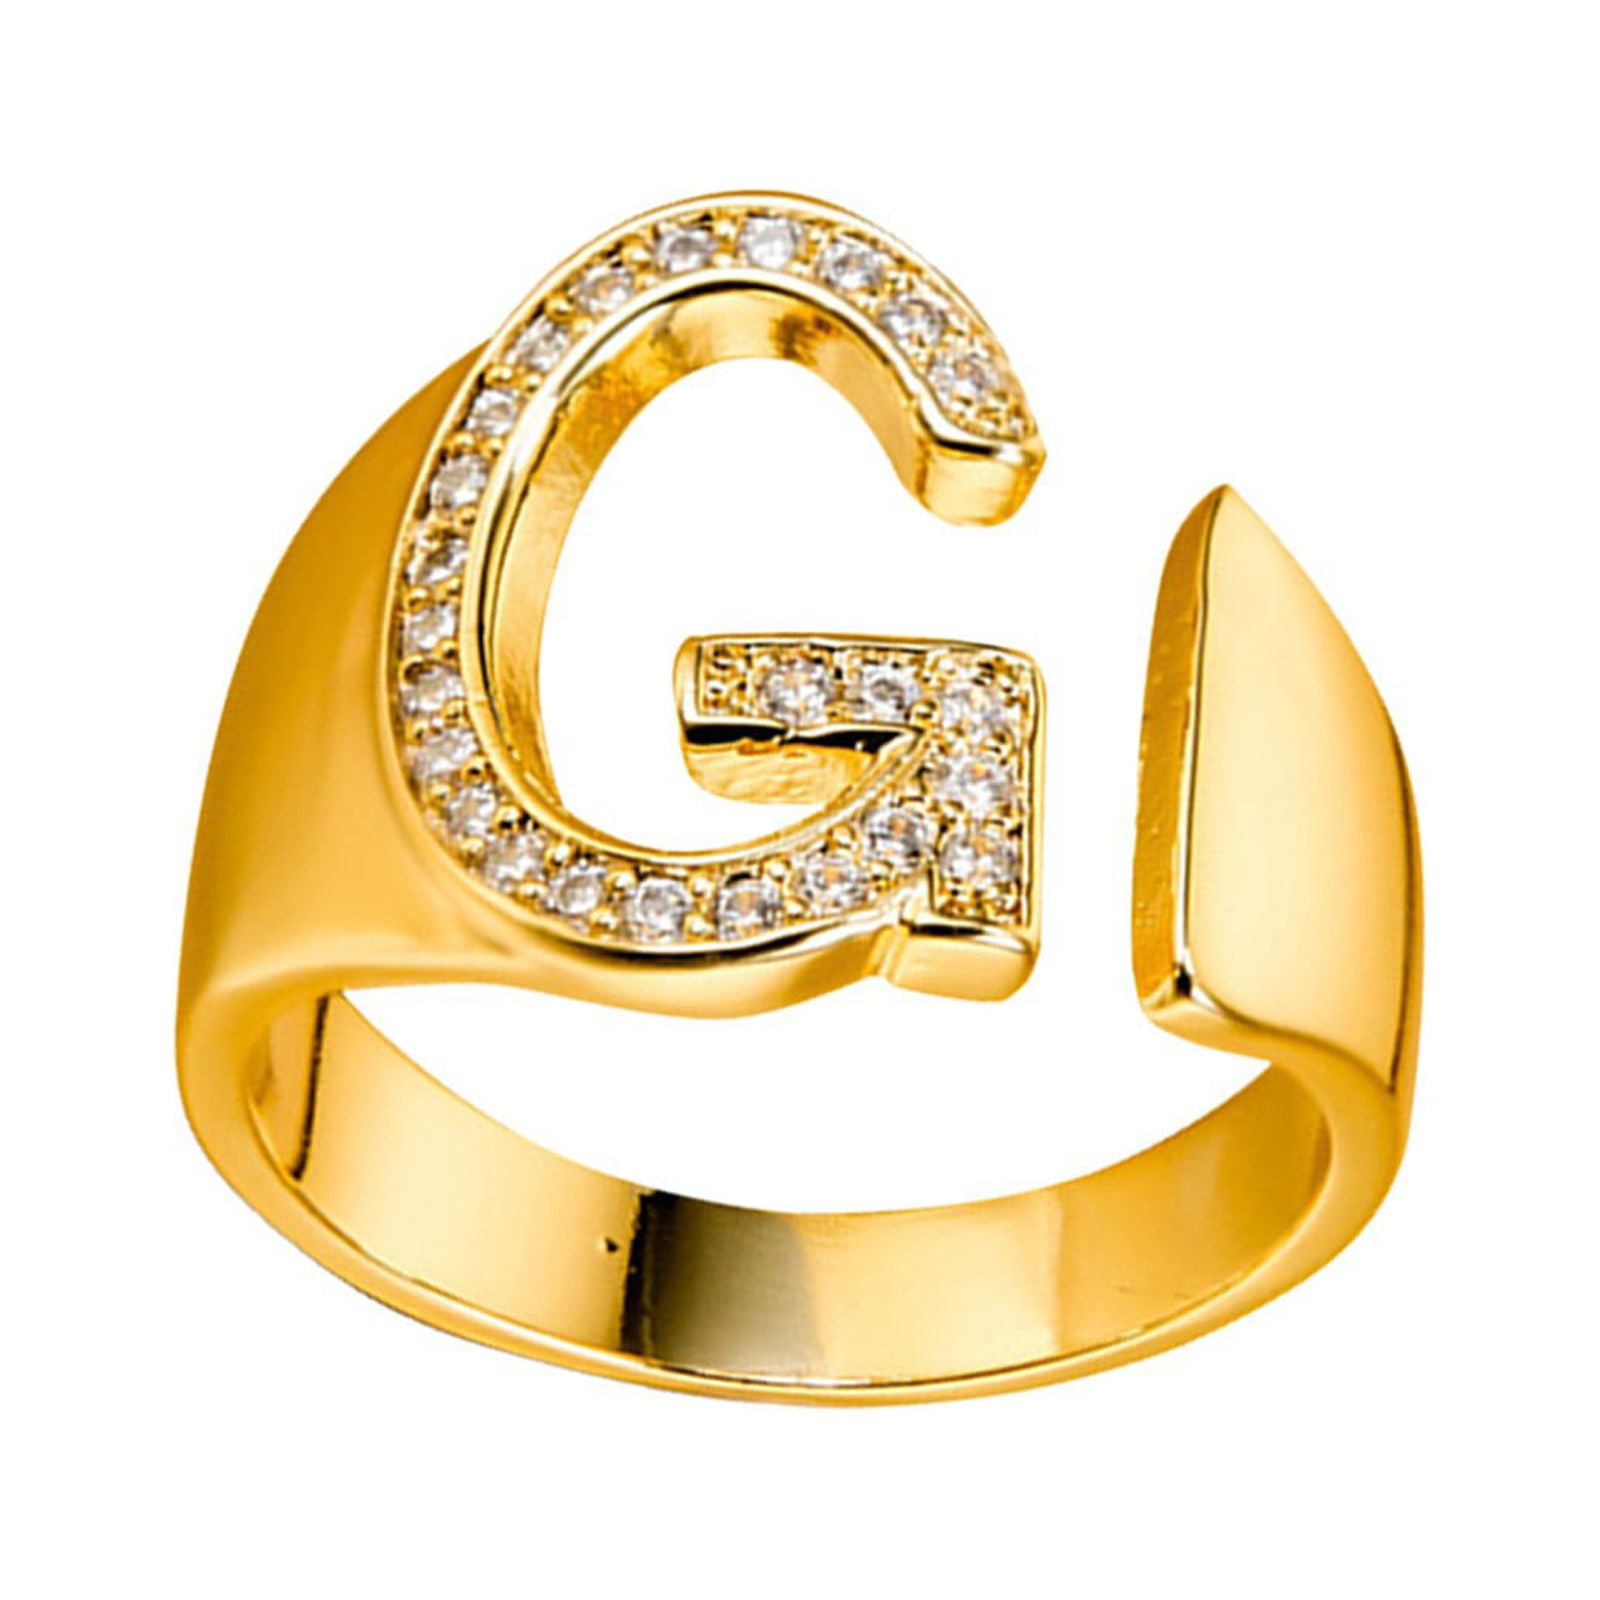 Ehan Designer Gold Ring - Buy Finest Indian Imitation Fashion Jewellery At  Best Price.